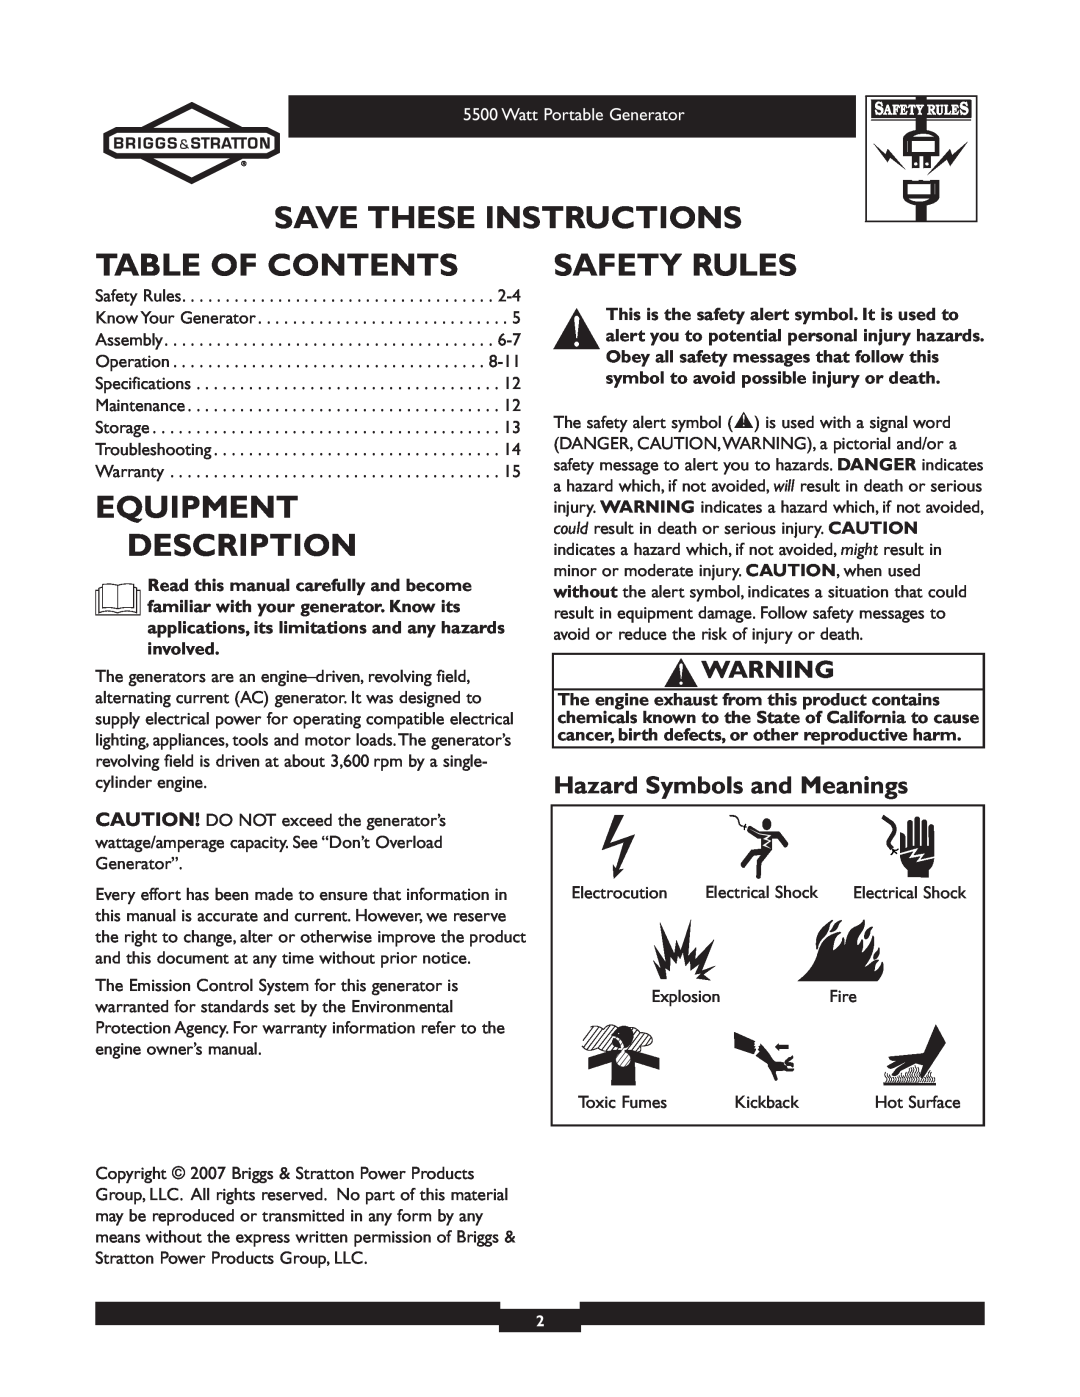 Briggs & Stratton 030206 owner manual Save These Instructions, Table Of Contents, Equipment Description, Safety Rules 